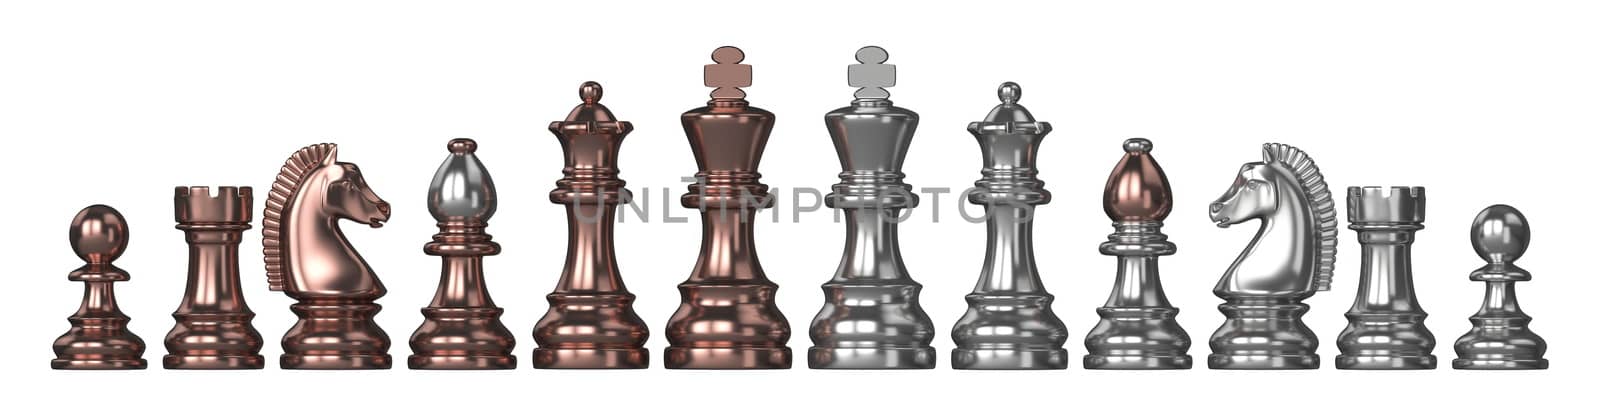 Silver and bronze all chess pieces 3D by djmilic